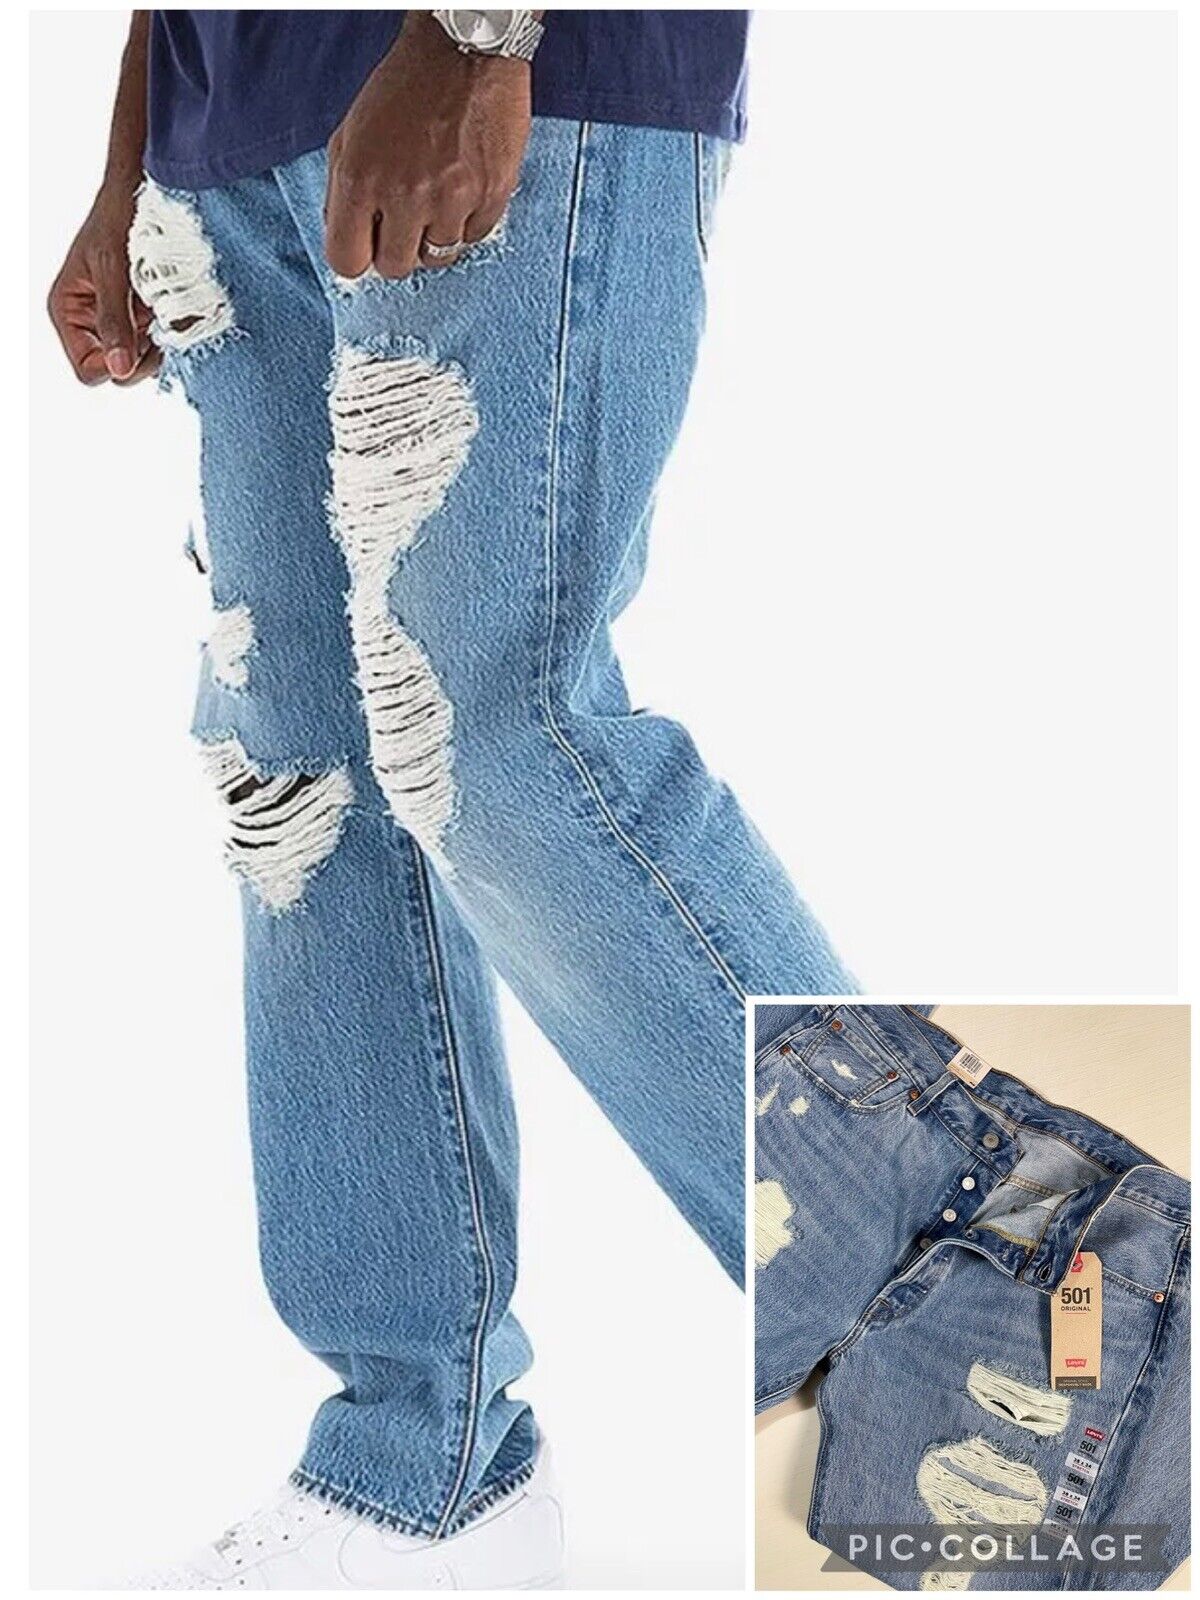 brooke corrick recommends levis ripped jeans pic